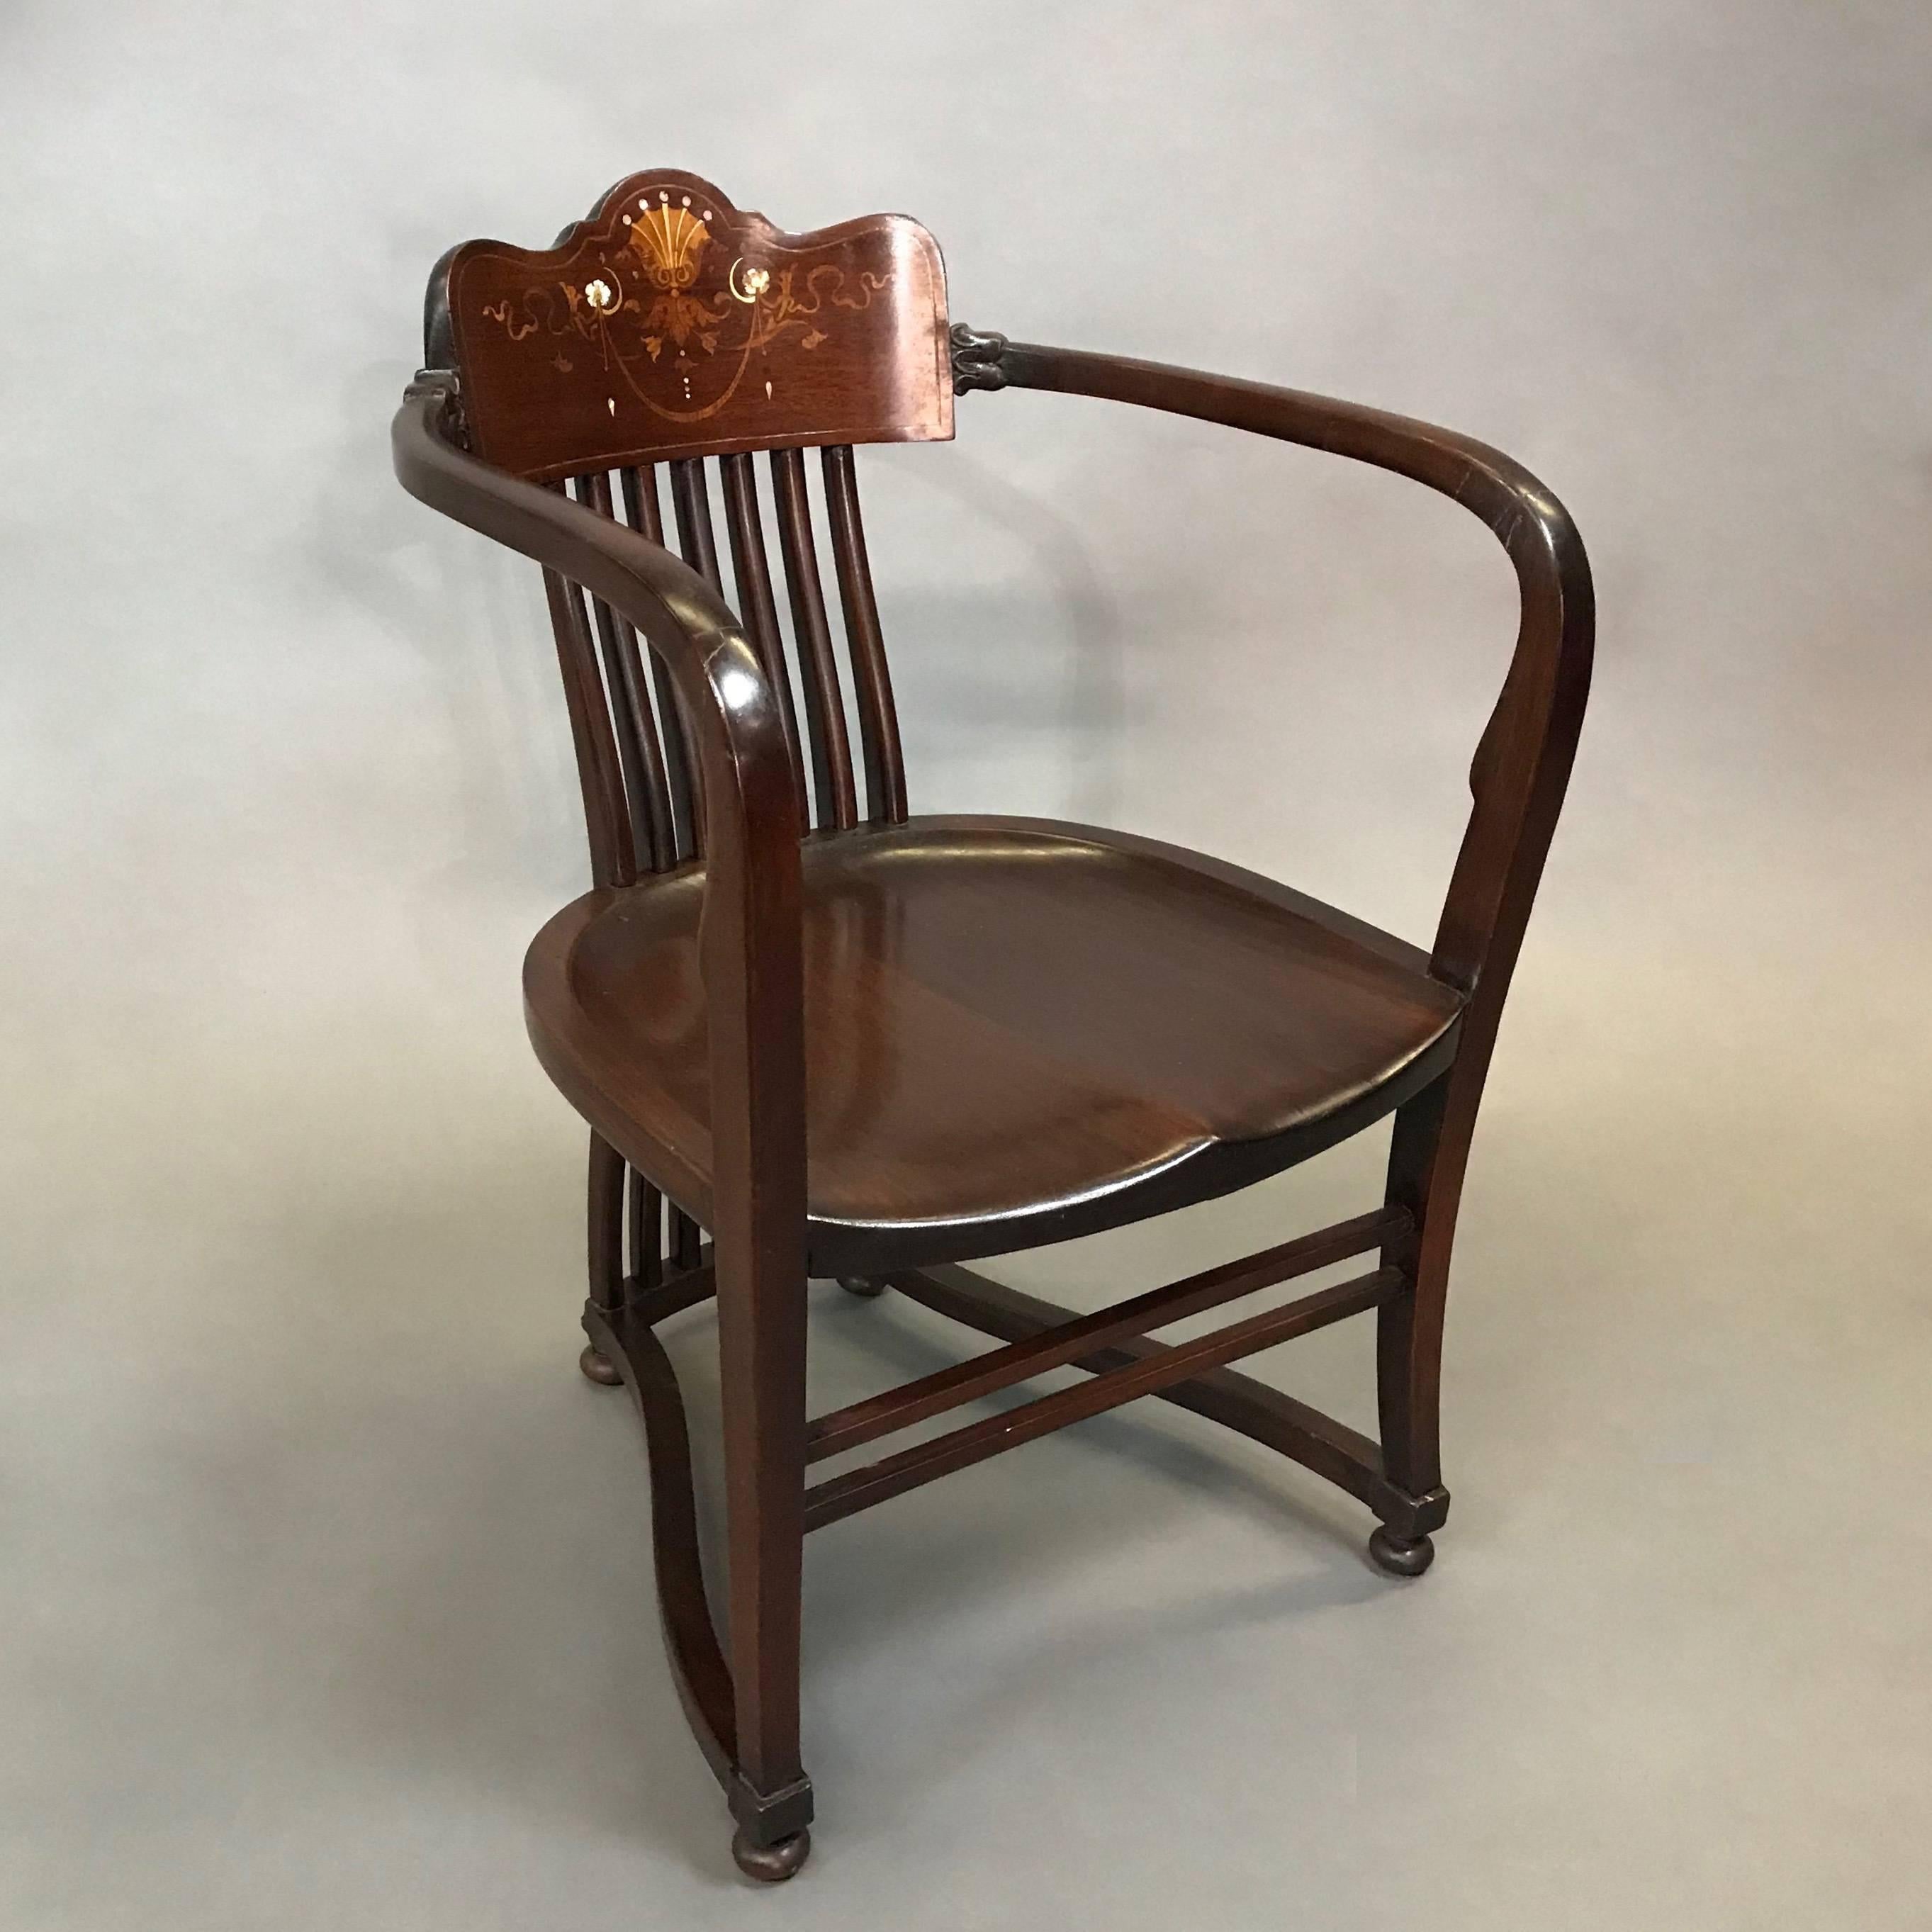 Wonderful, antique, mahogany armchair circa 1860s features a spindle back, wide arms and decorative mother-of-pearl and boxwood inlay detail on the back rest.